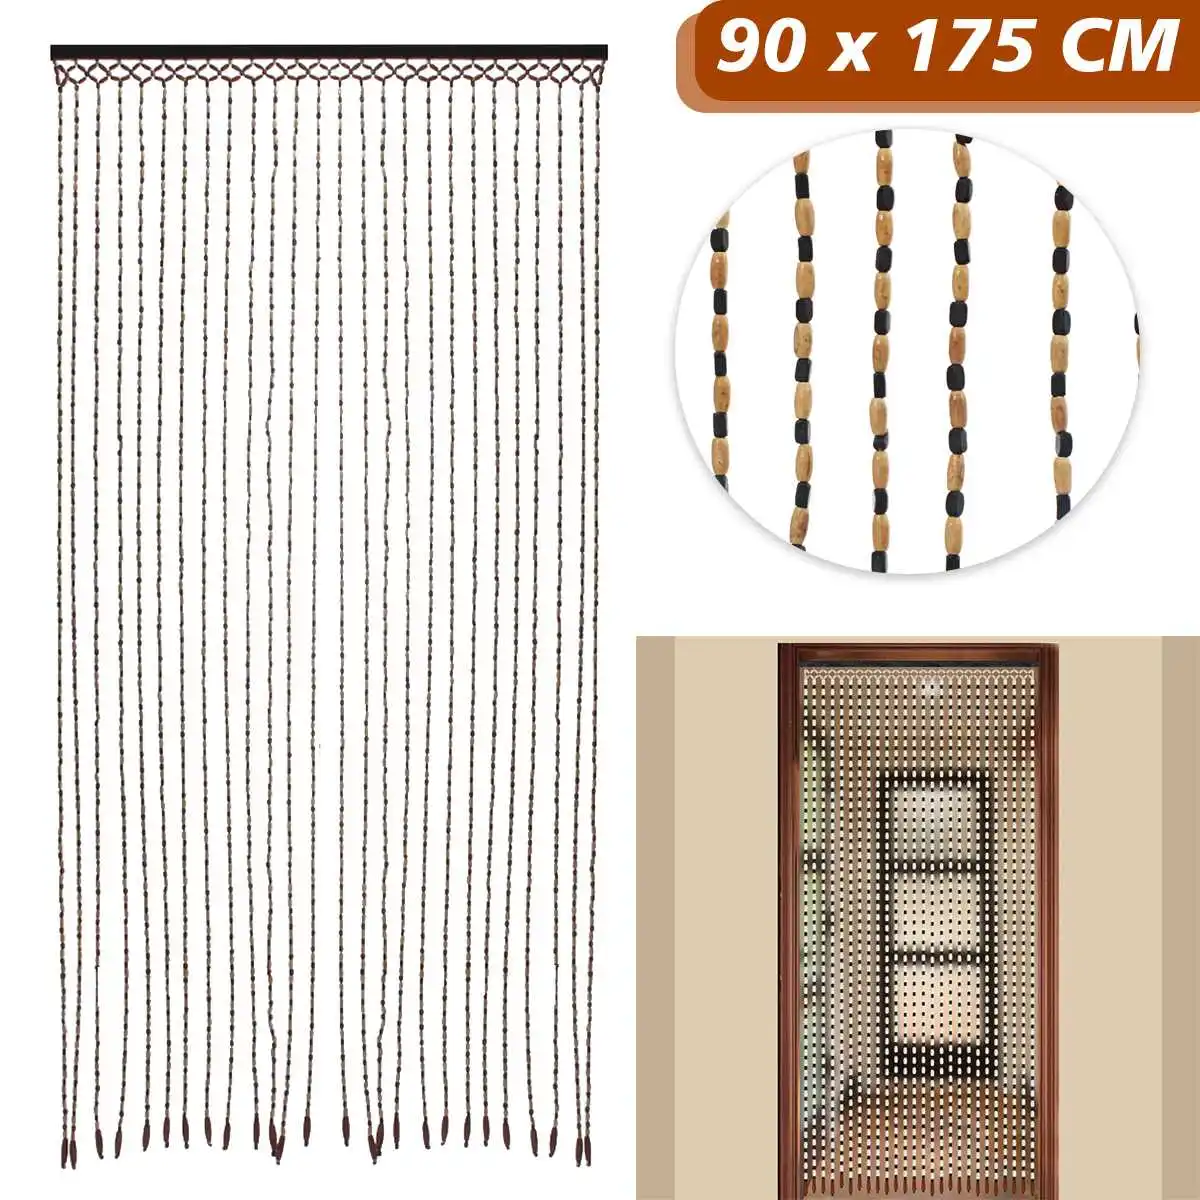 JVL Wooden Bamboo Beaded Patterned Fly Screen Door Curtain 90 x 180cm 